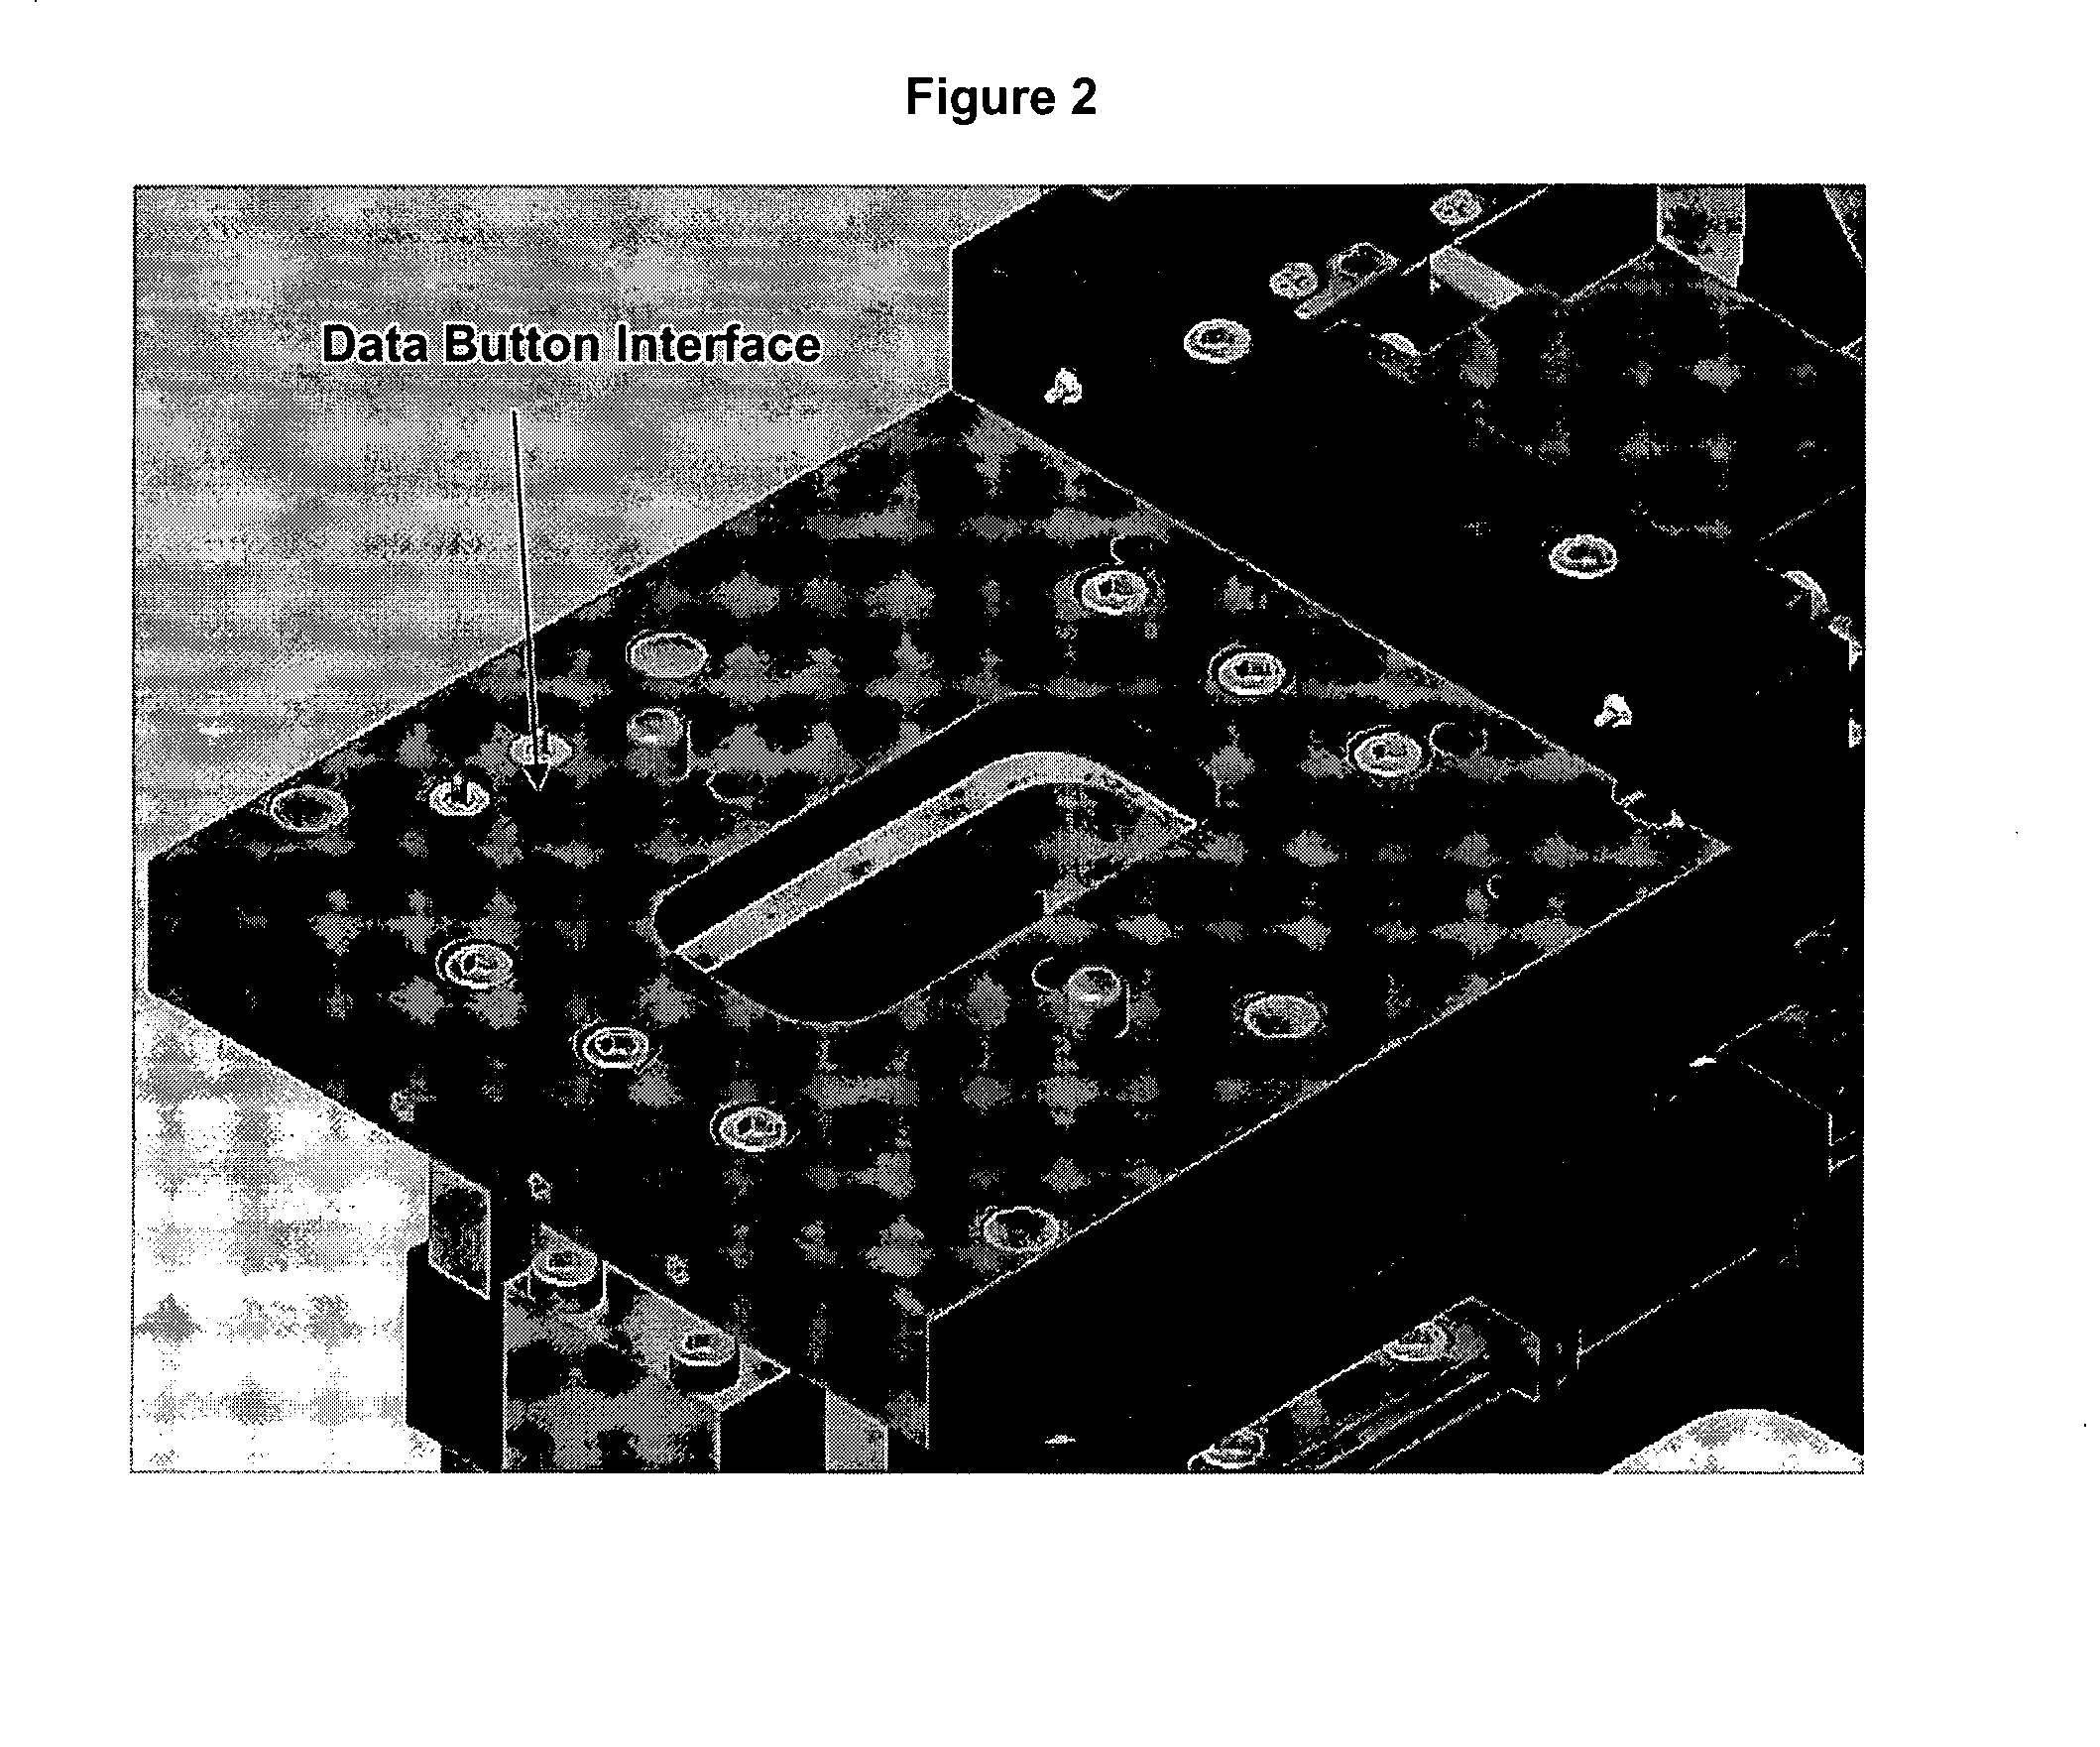 Diagnostic imaging device for the analysis of circulating rare cells